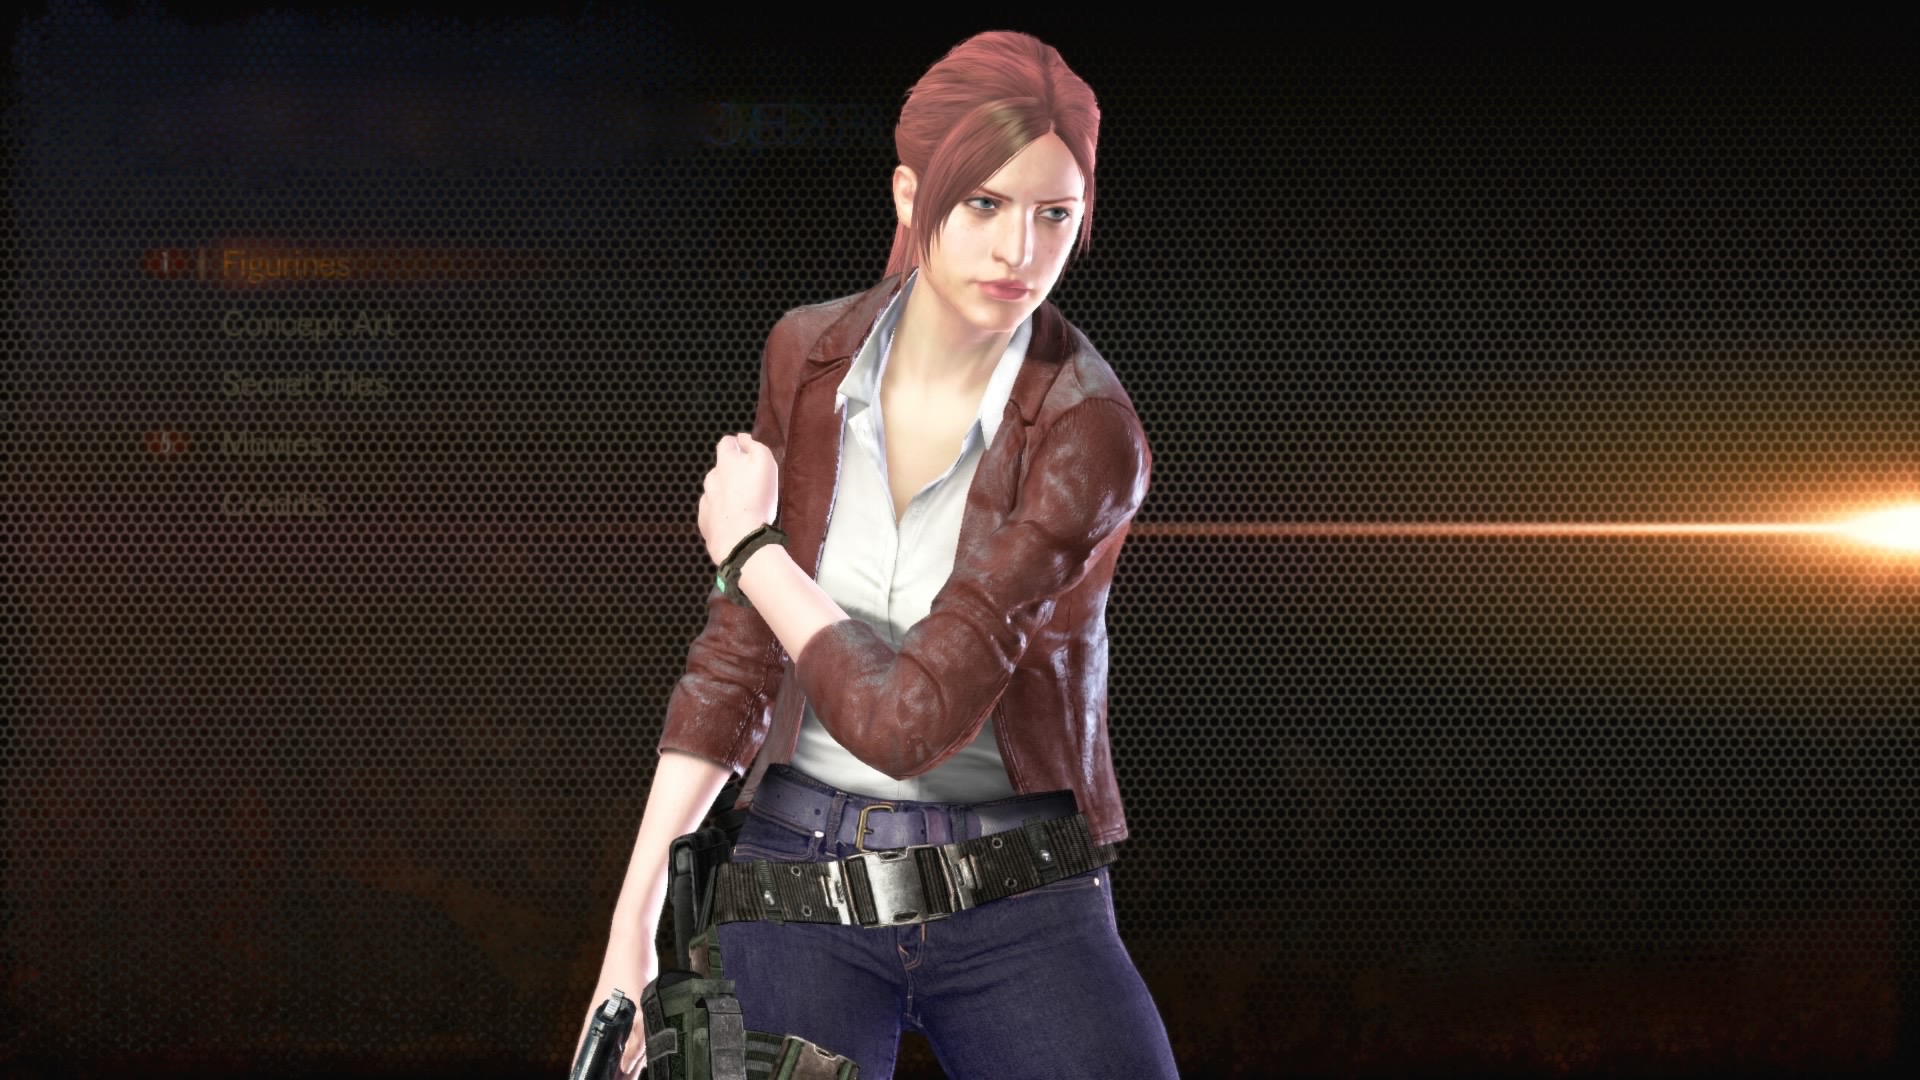 undecayed — Resident Evil Revelations 2 Edits 11/∞ Claire